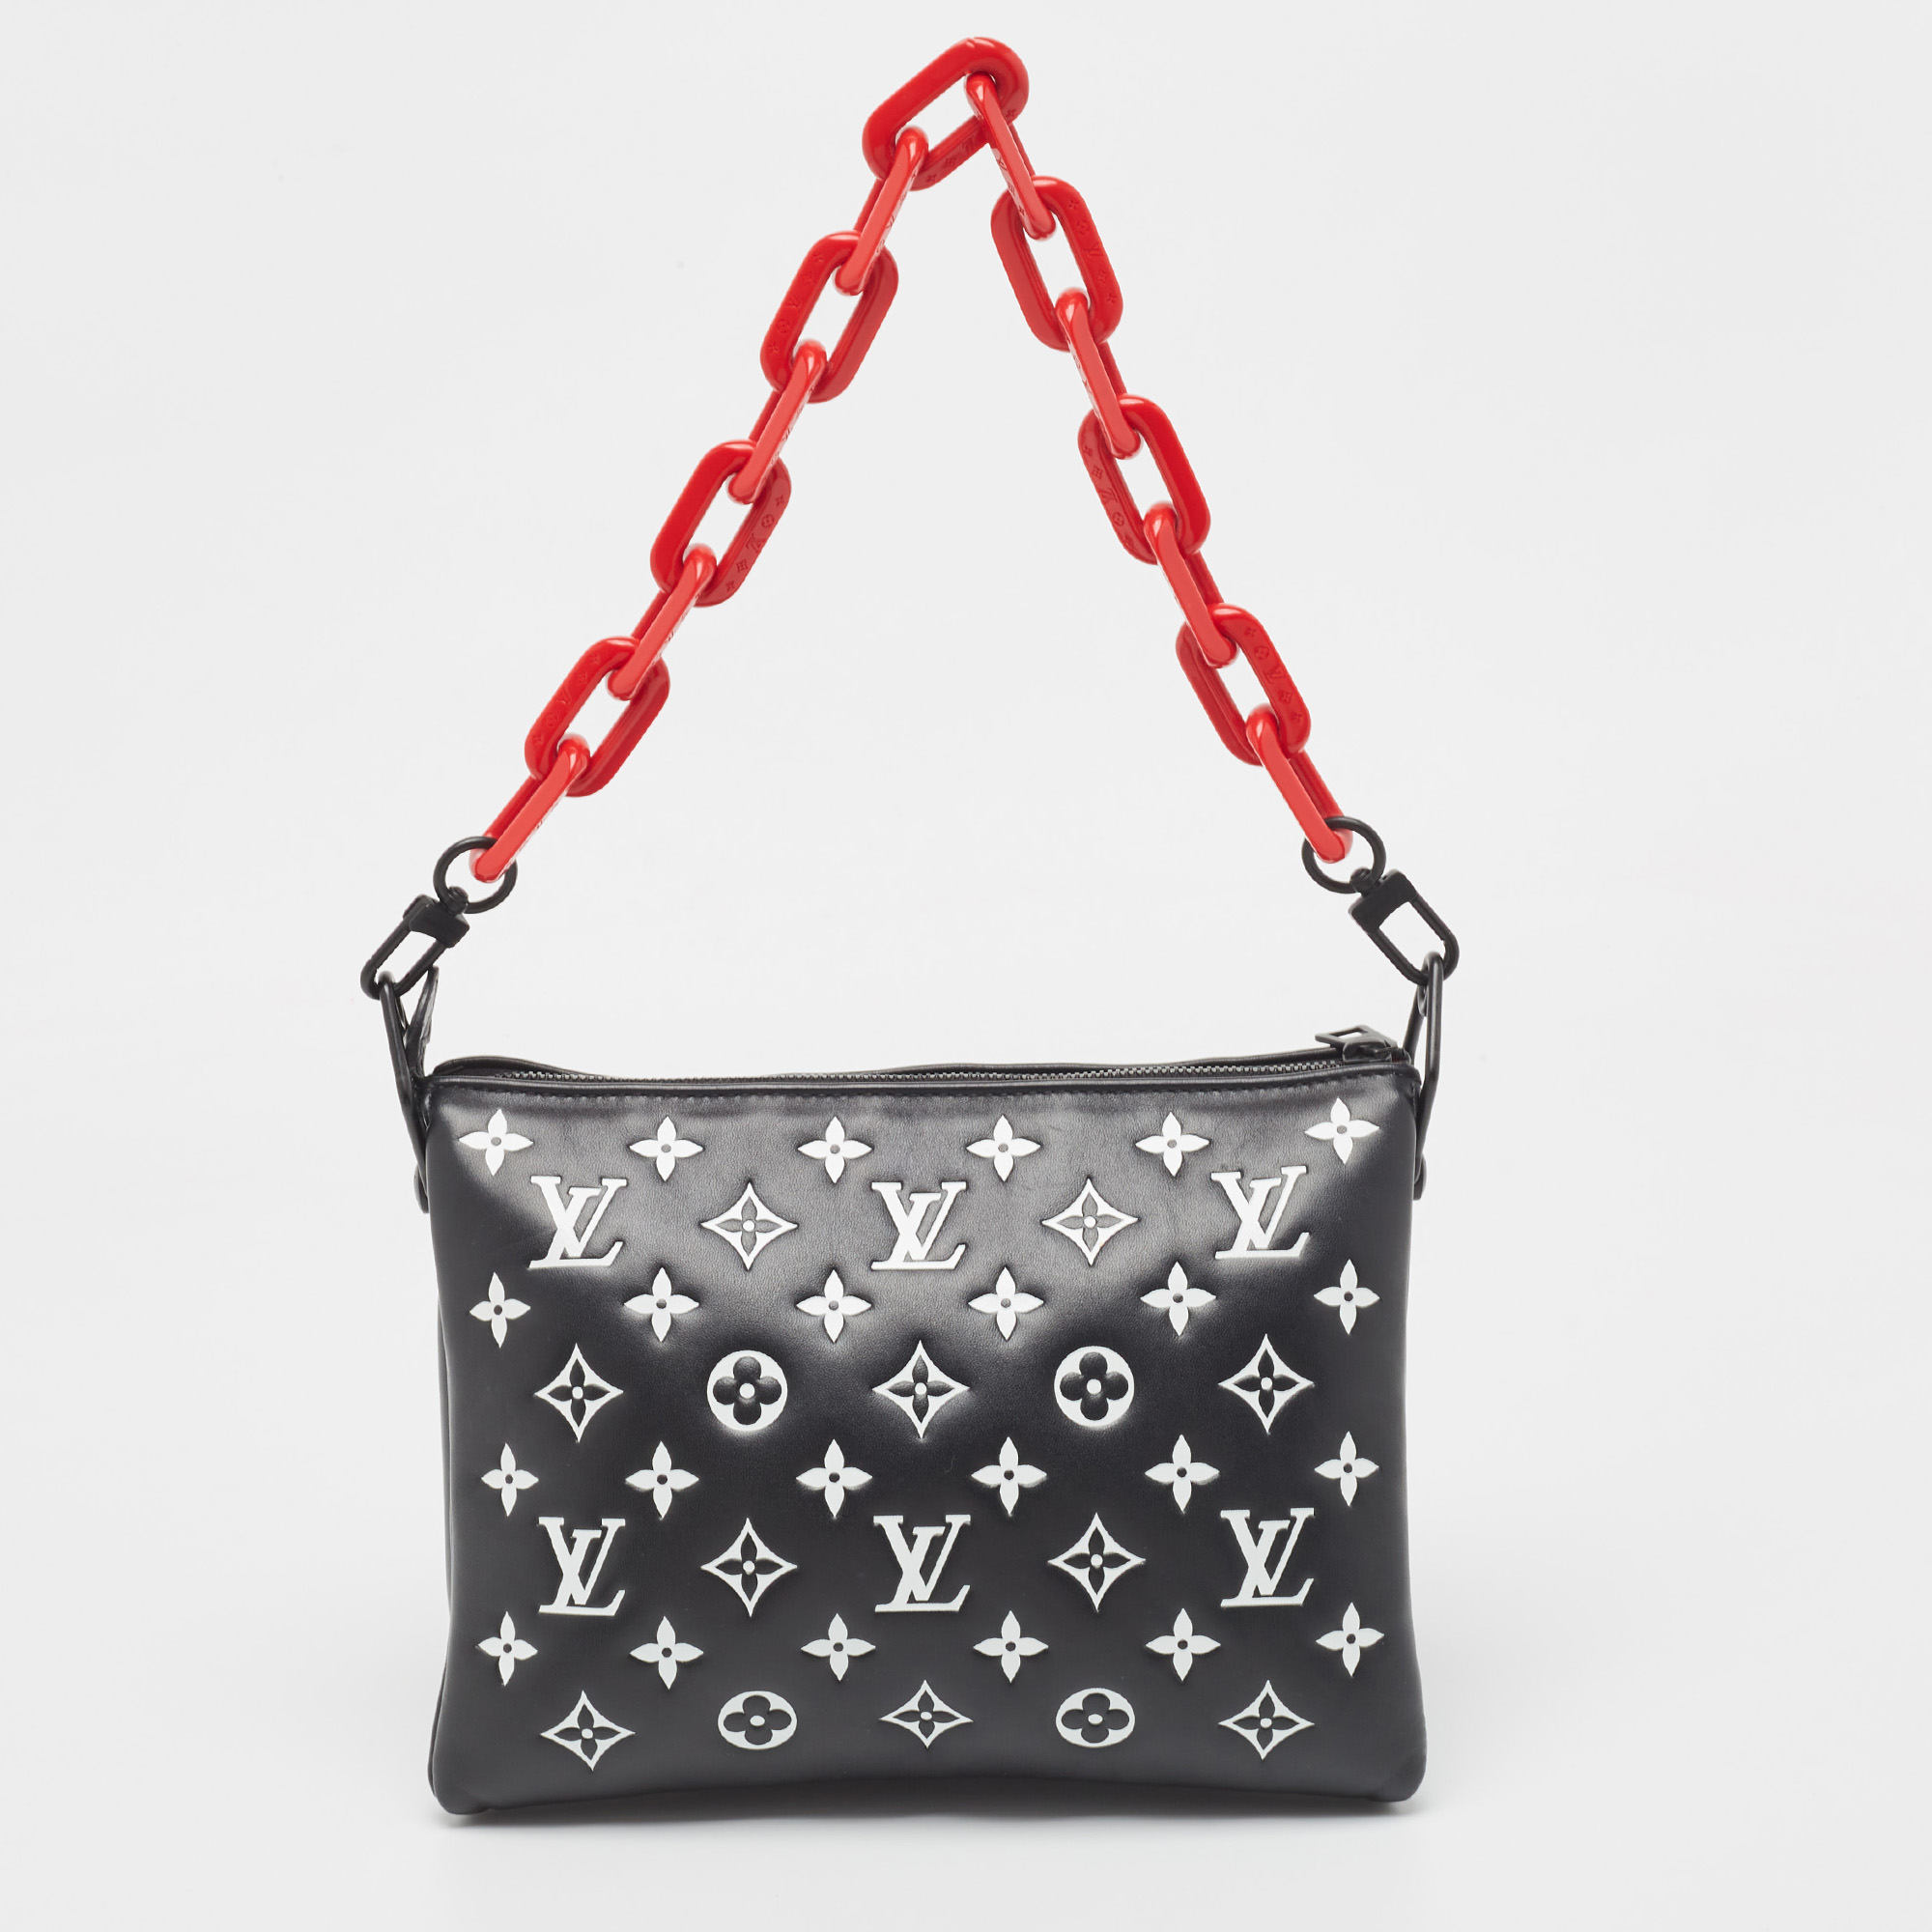 Louis Vuitton Black/White Monogram Embossed Leather Coussin PM Bag